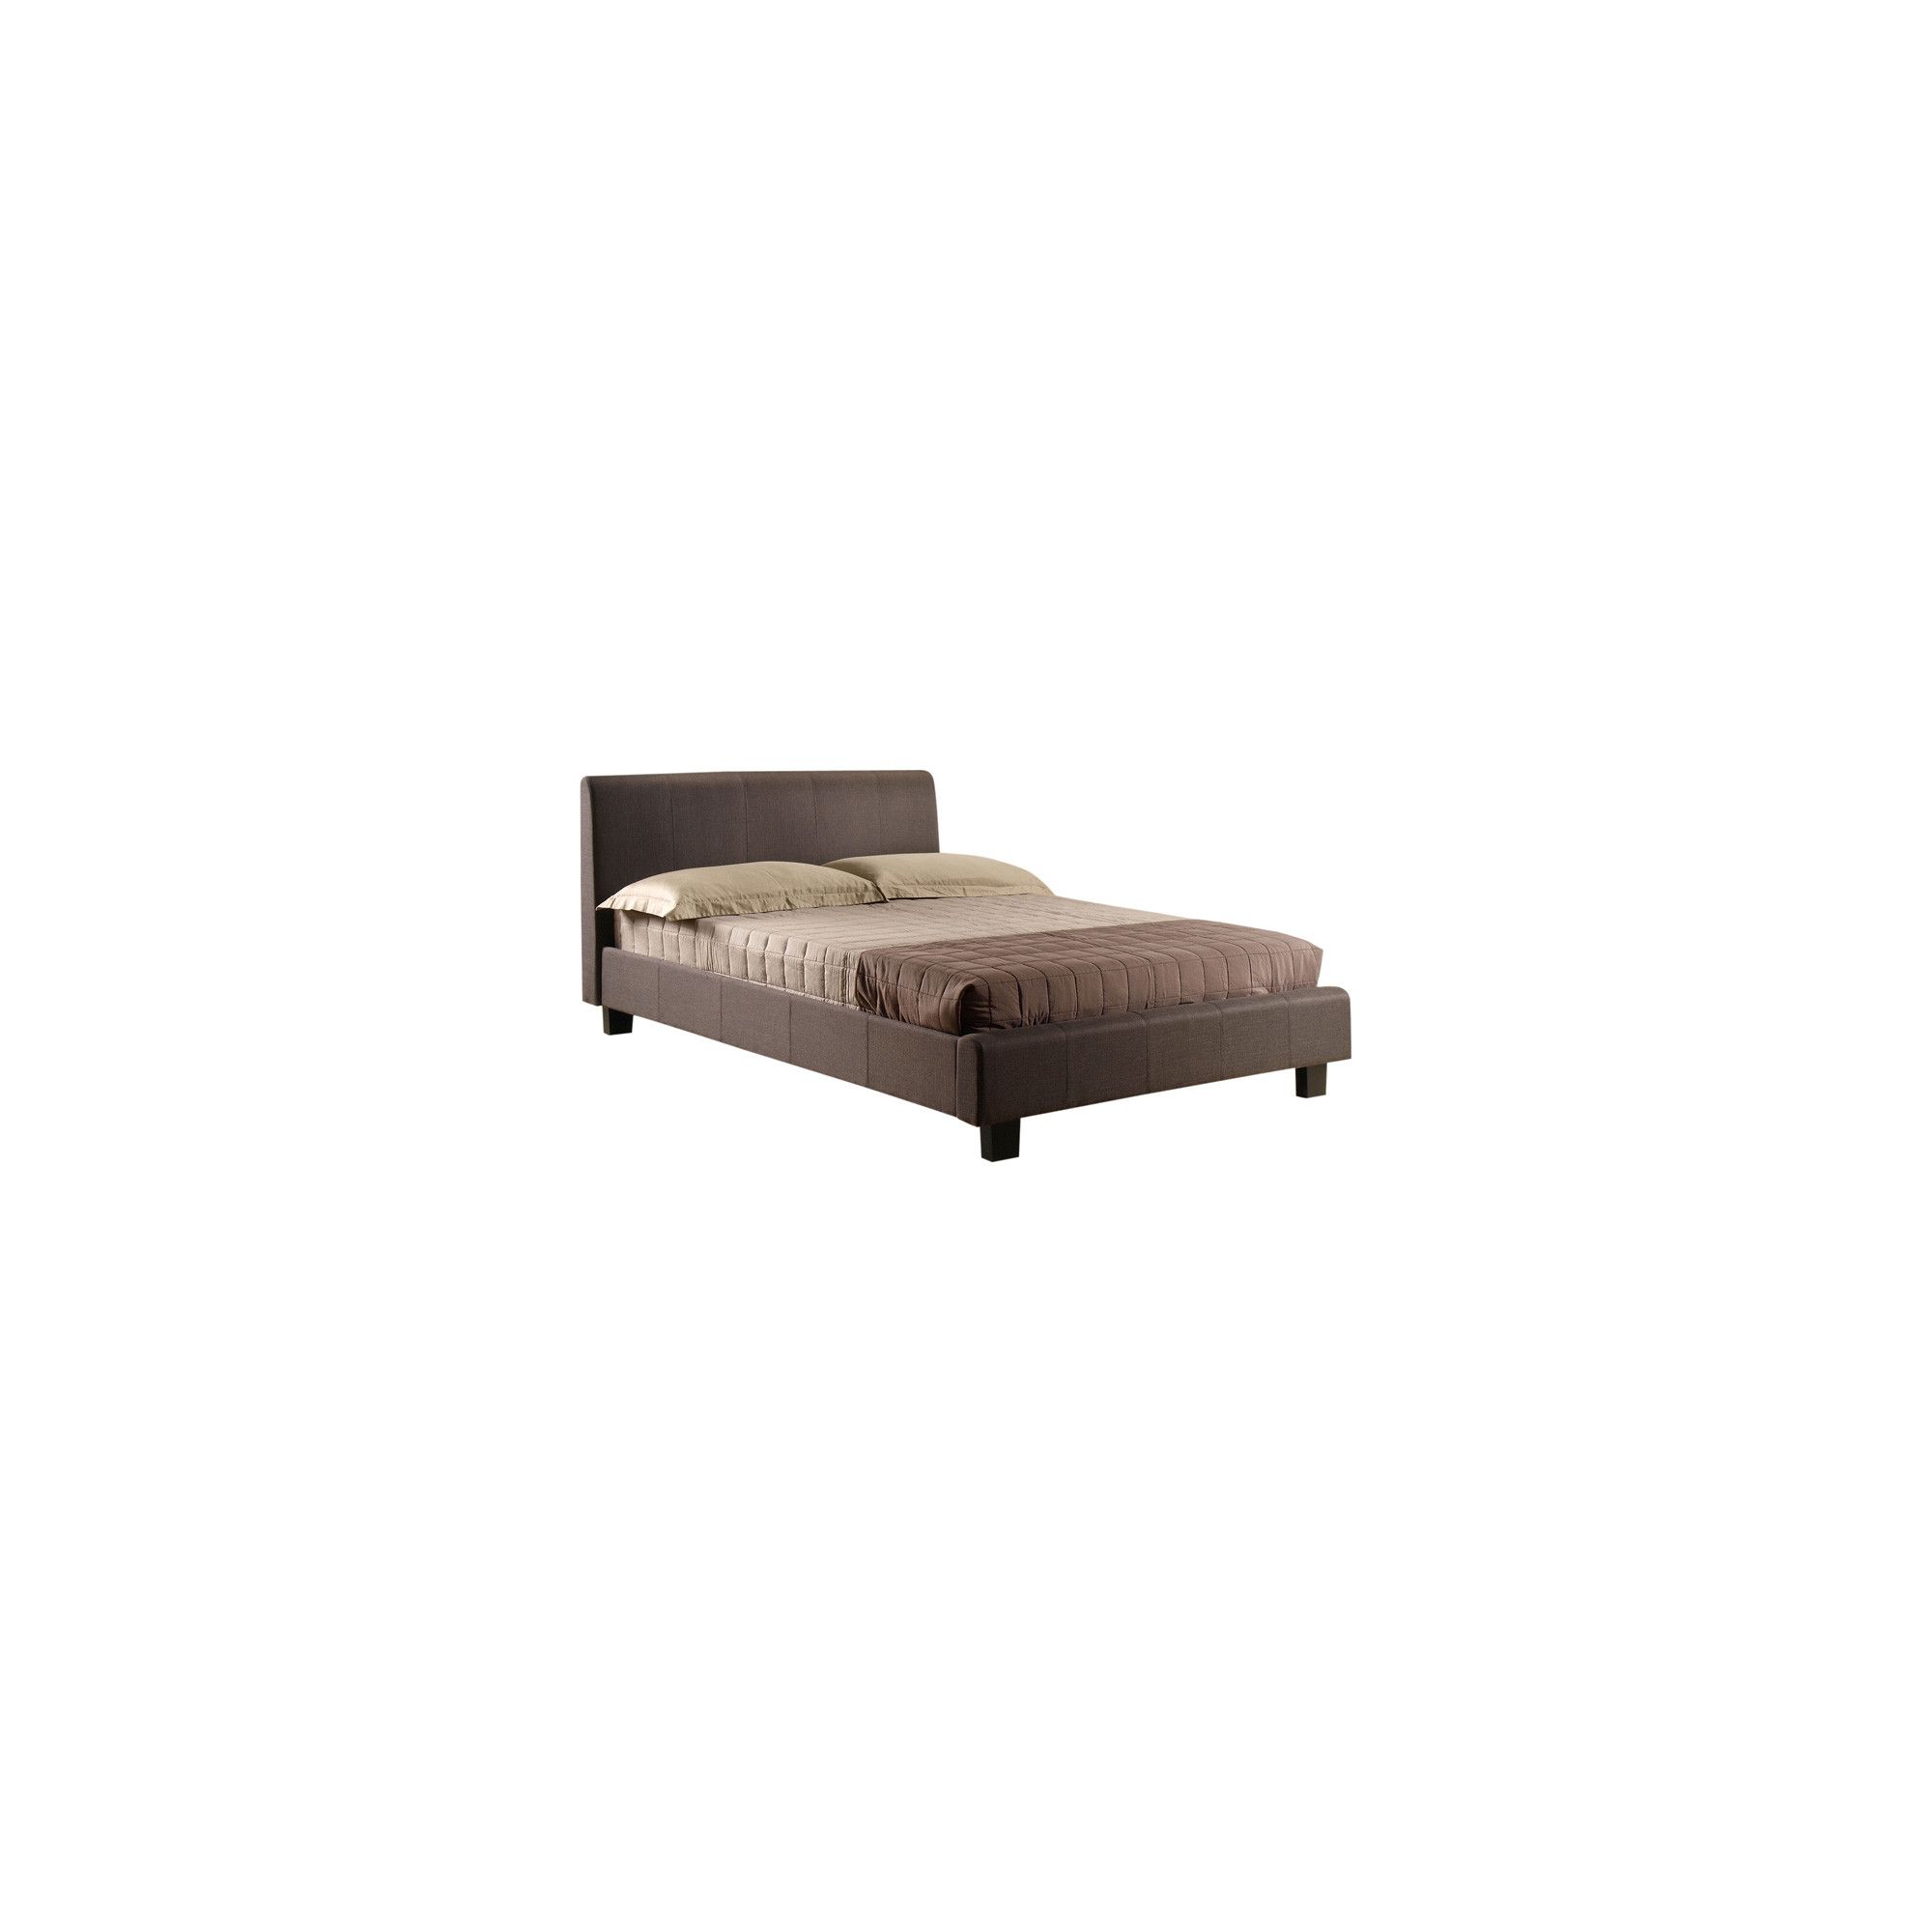 Altruna Hamburg Fabric Bed Frame - Small Double - Cocoa Brown at Tesco Direct